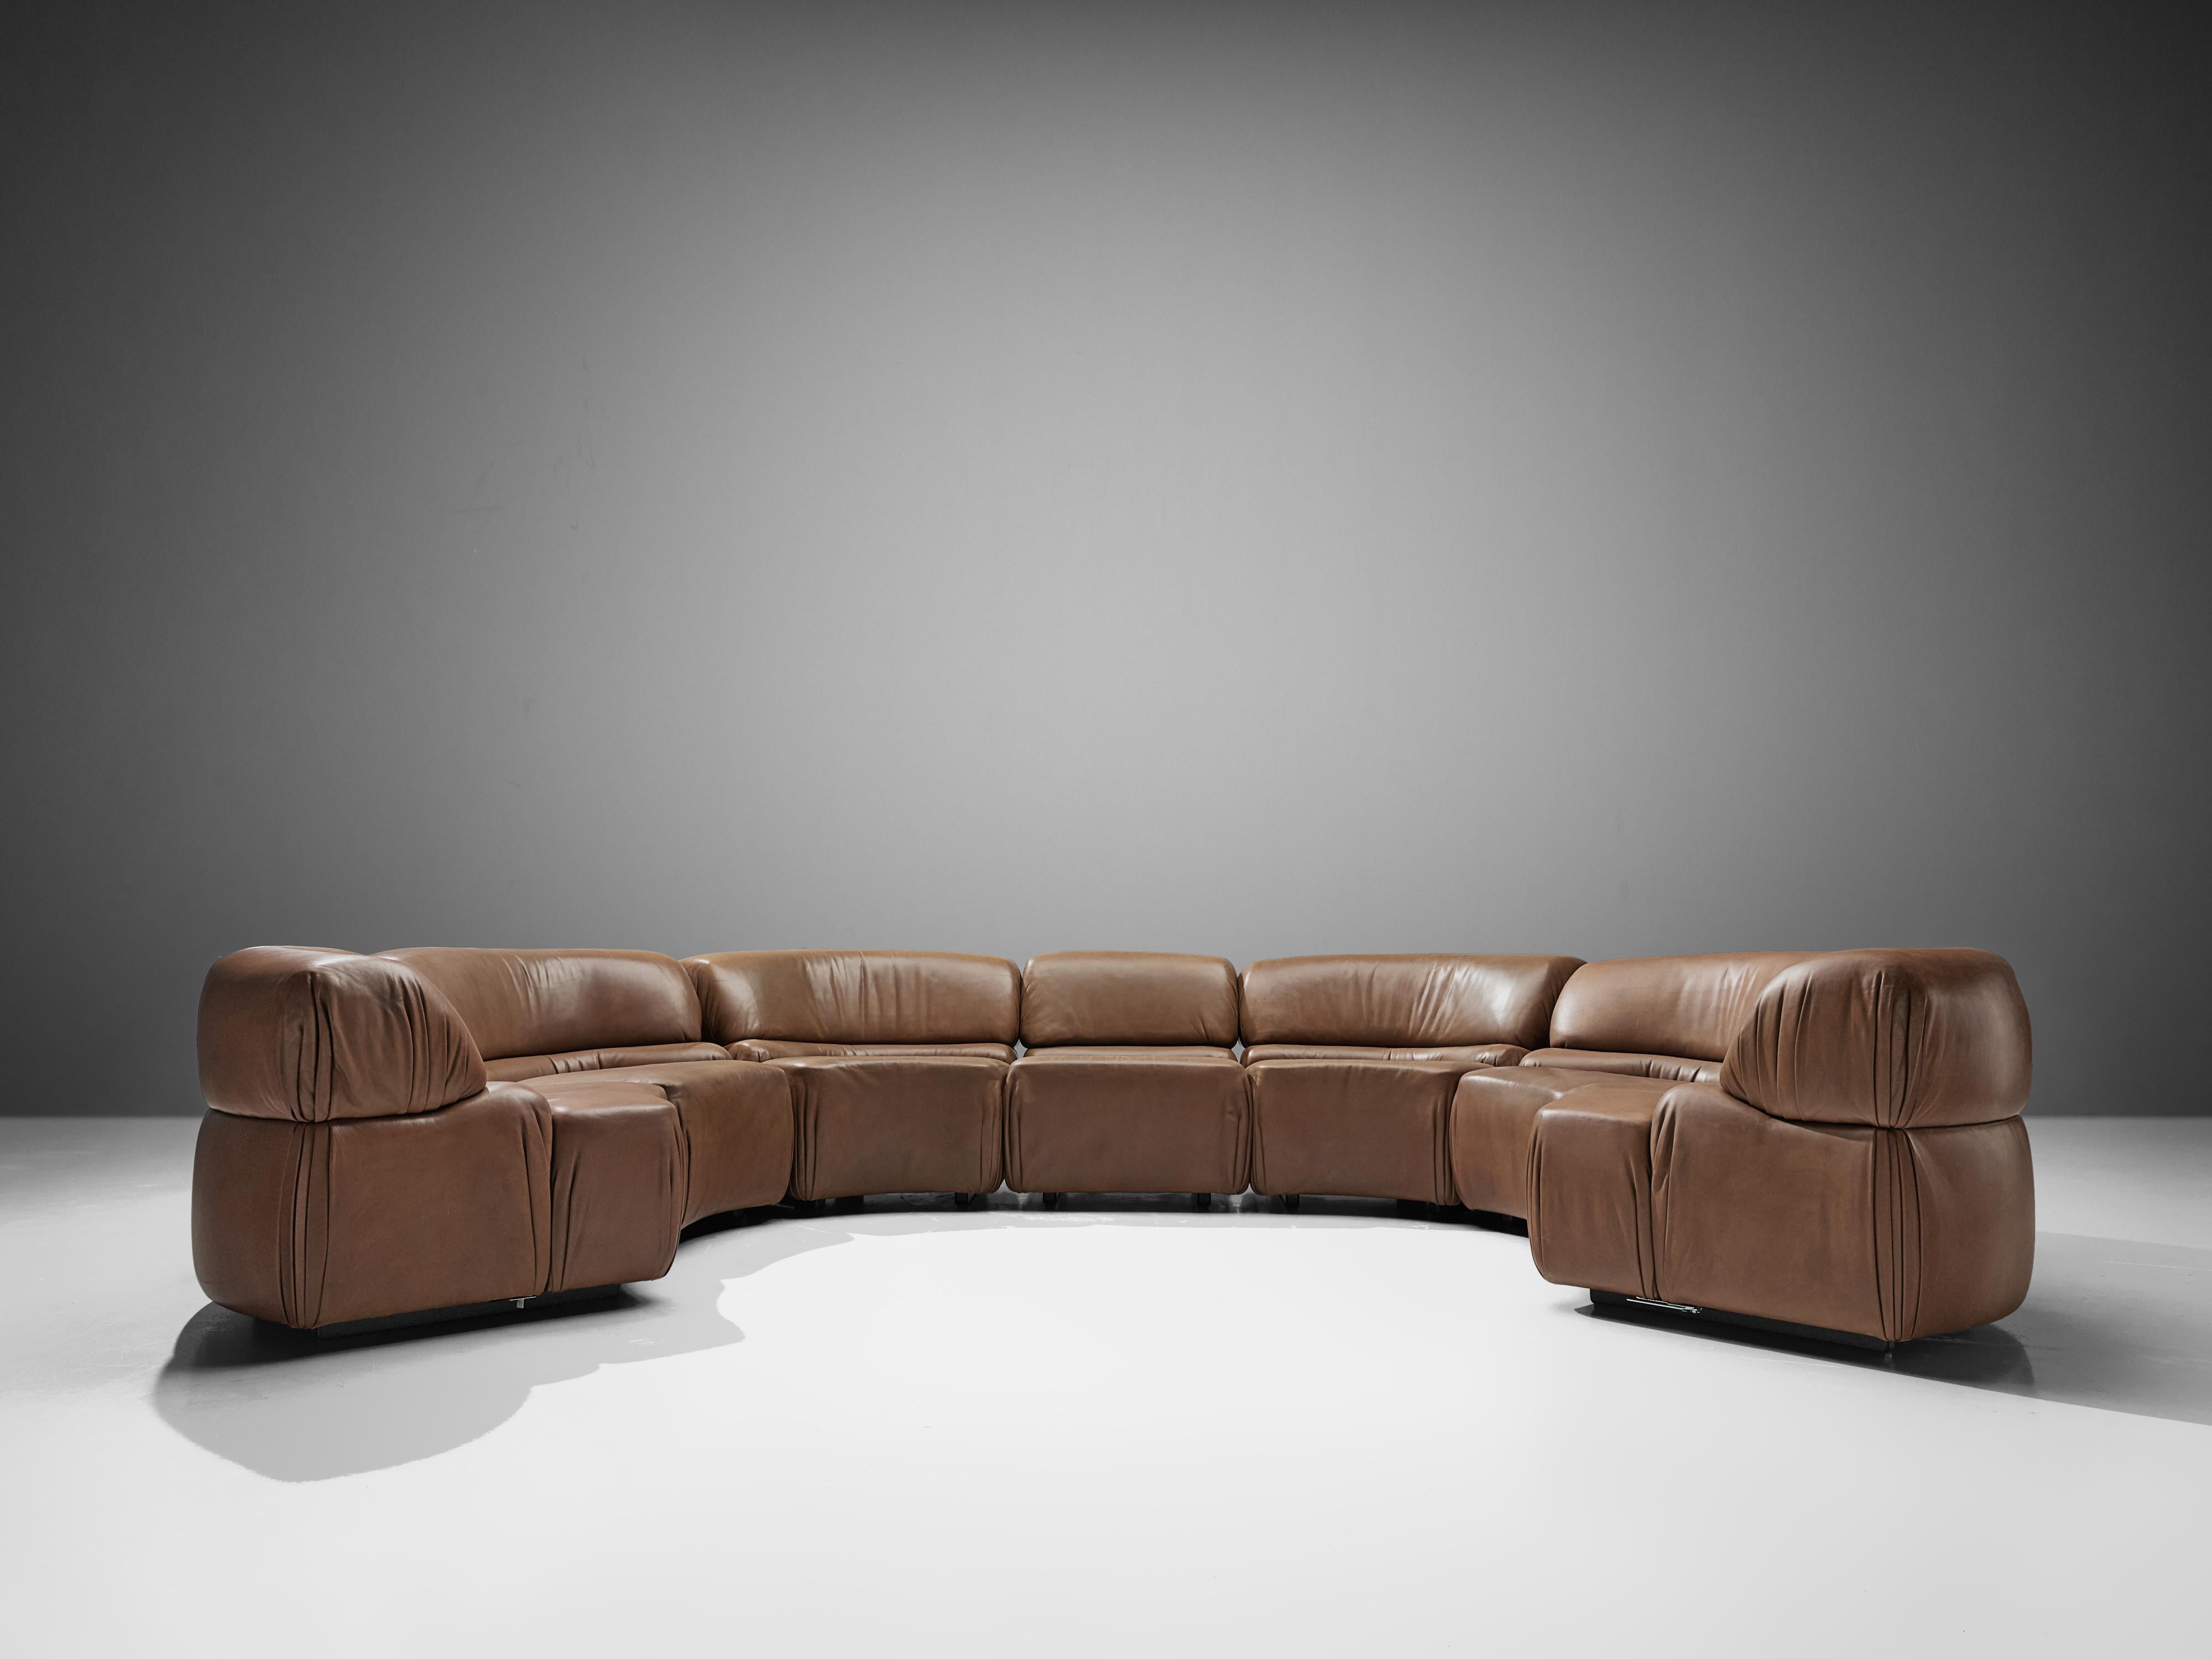 Swiss De Sede Sectional Sofa 'Cosmos' in Brown Leather